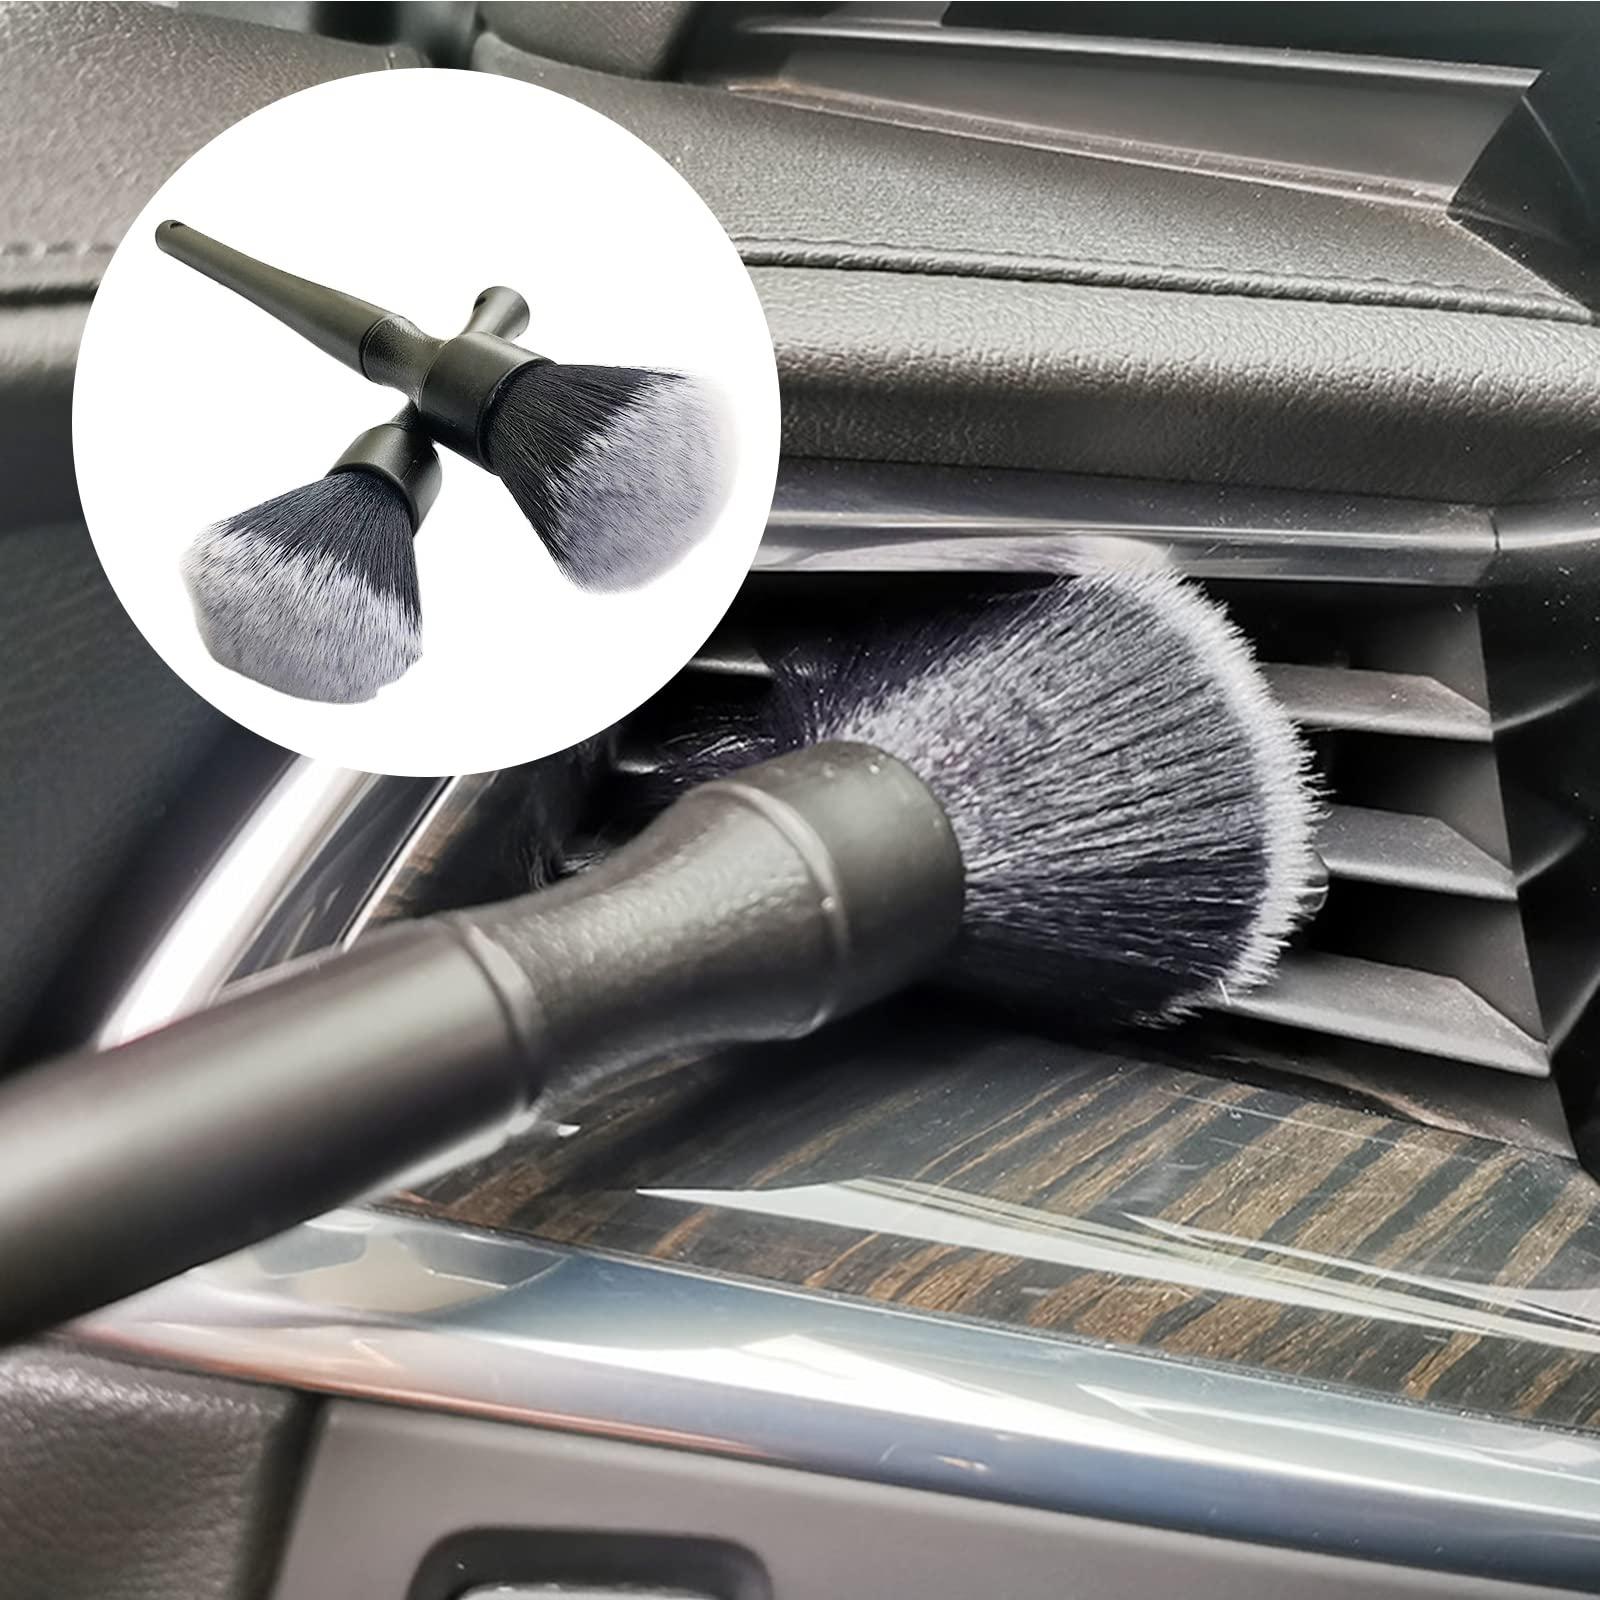 ALI2 Detailing Brush Set,Soft Comfortable Grip for Car Interior and Exterior Detailing Cleaning,Black 6